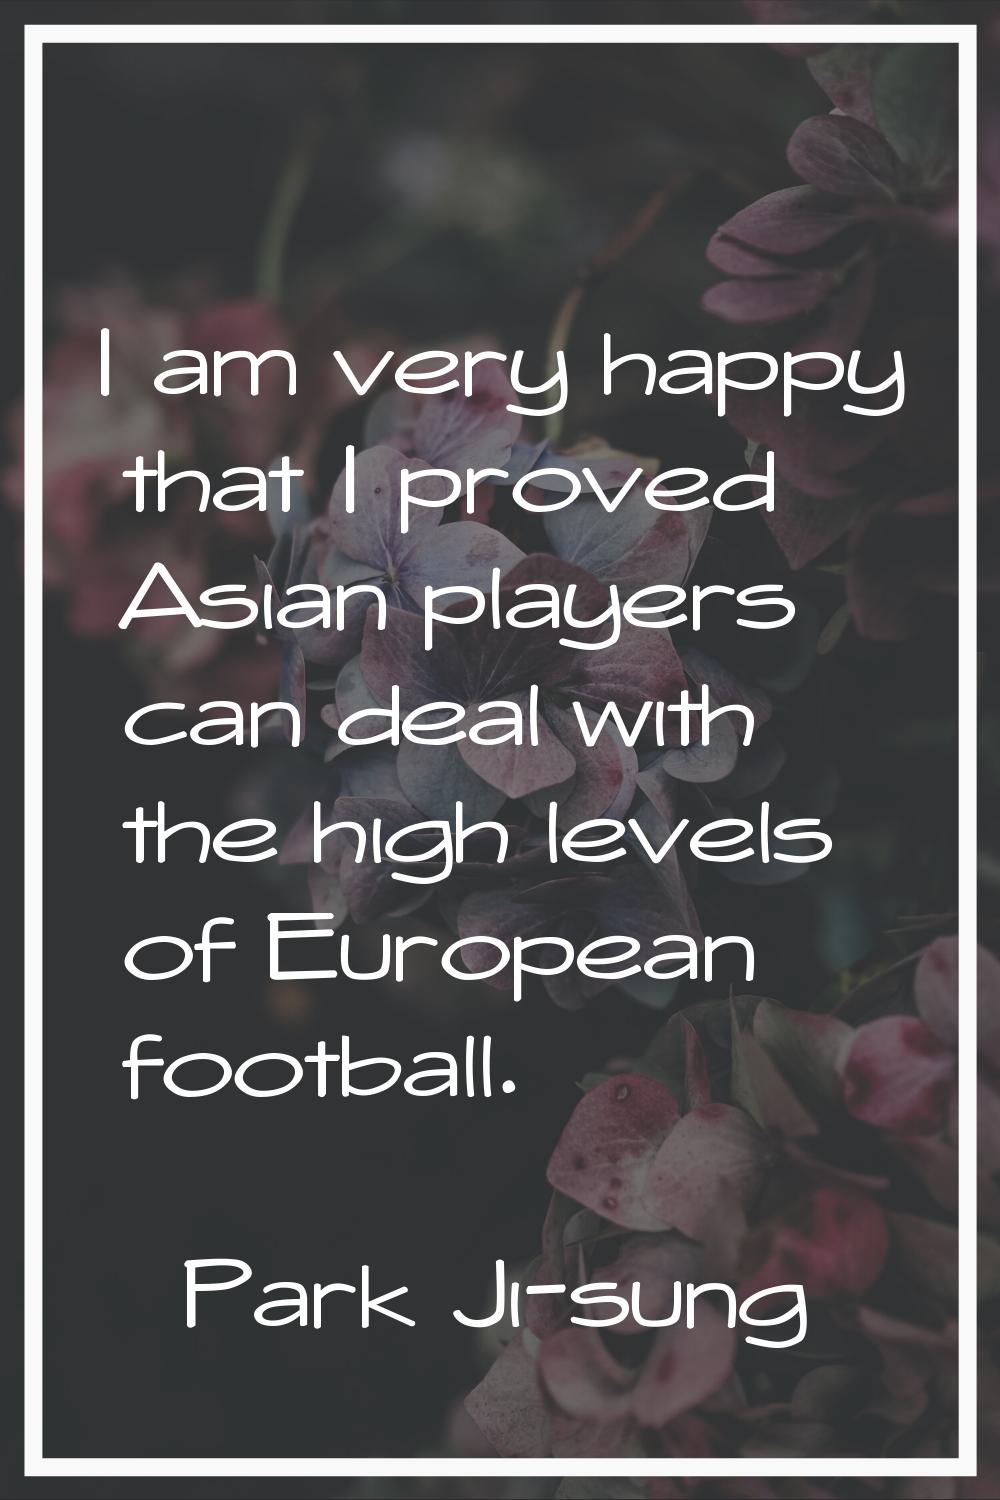 I am very happy that I proved Asian players can deal with the high levels of European football.